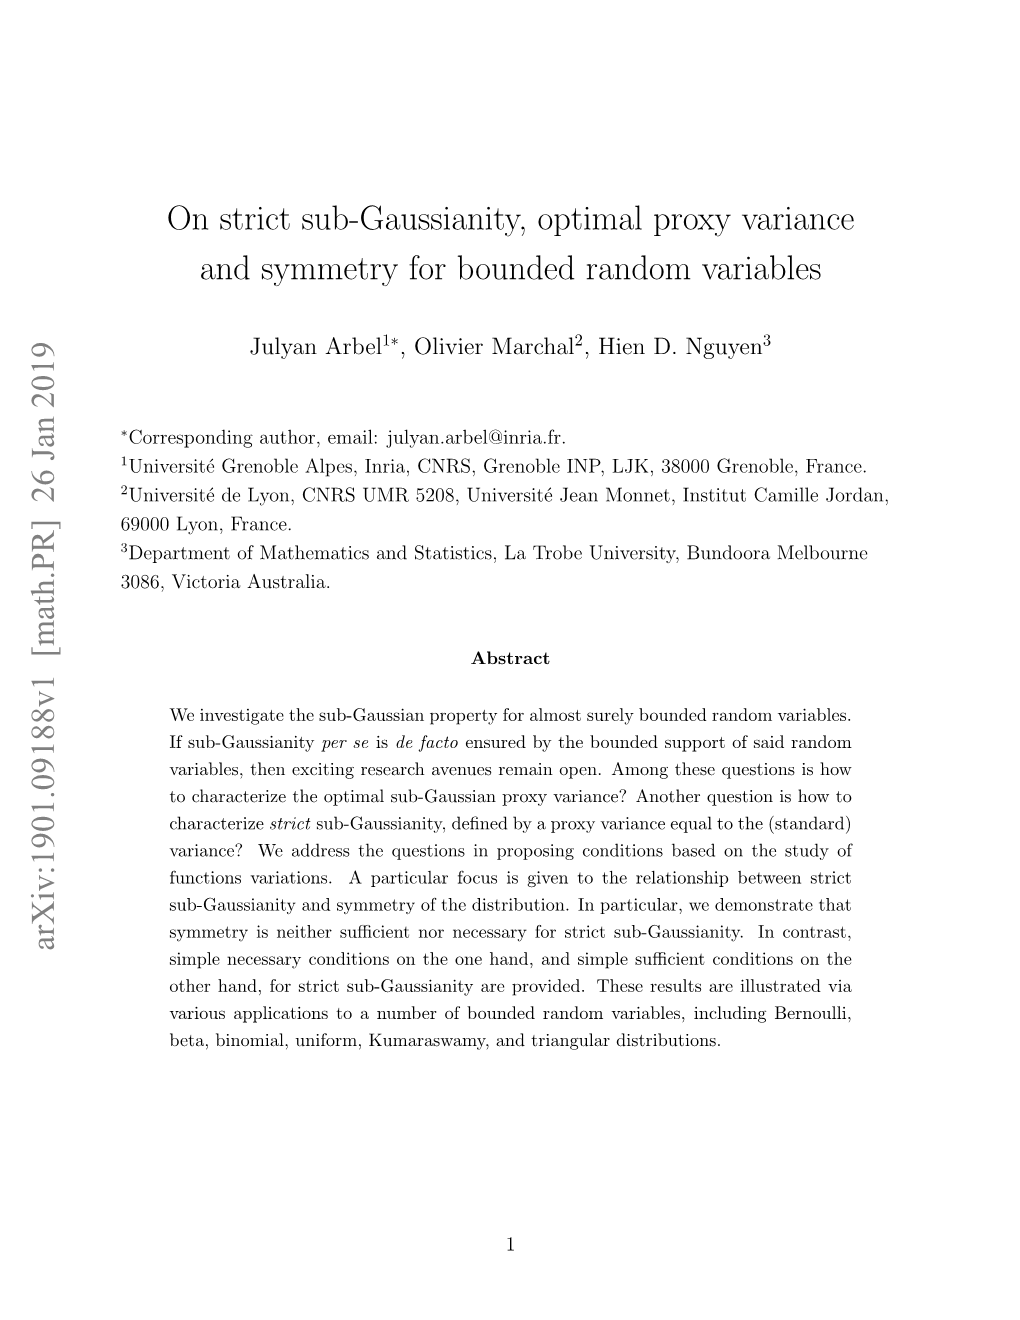 On Strict Sub-Gaussianity, Optimal Proxy Variance and Symmetry for Bounded Random Variables